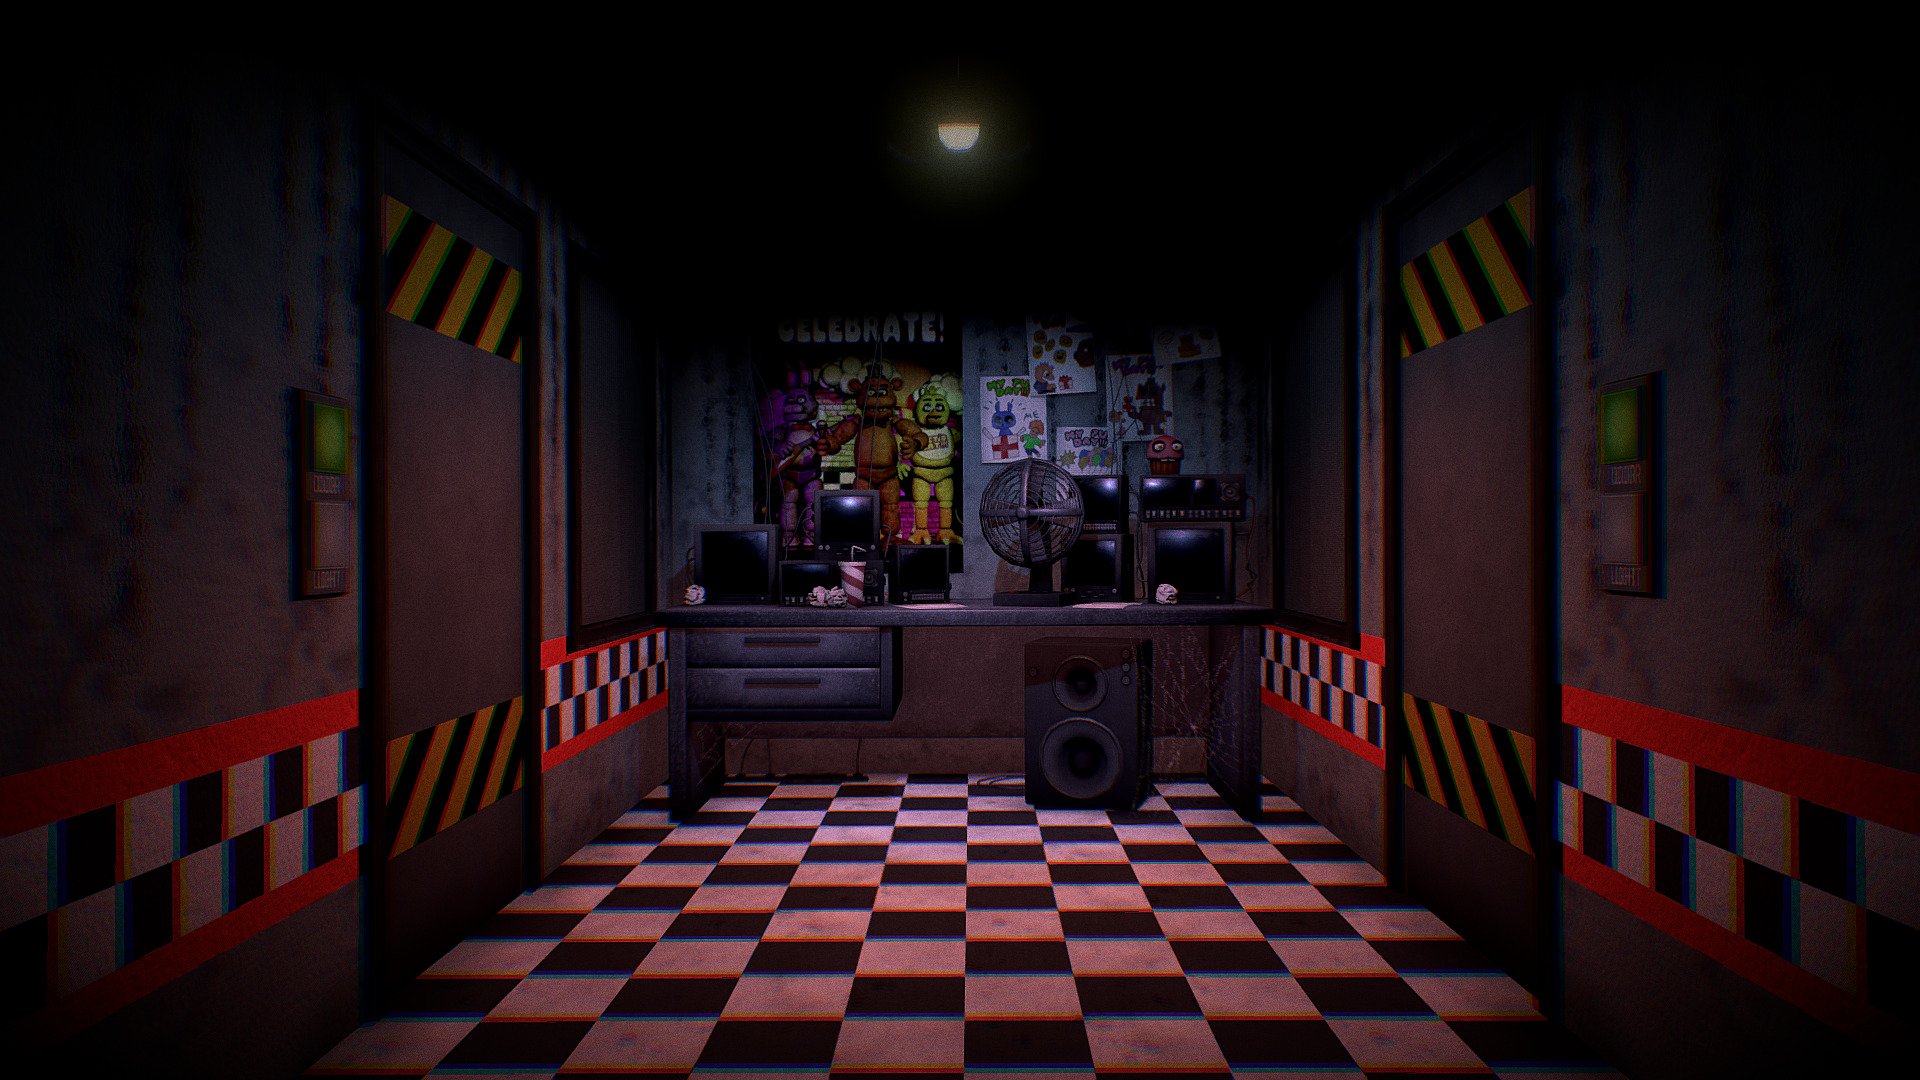 A model of the office of the first game of Five Nights at Freddy's. I tried to make every detail as exact as possible to the original. To make every element more visible, I have brightened up the scene, adding more light than the original office.

3ds Max was used for the models and UV unwrapping, Substance 3D Painter for the textures and Illustrator to create the drawings on the back wall.

ArtStation project: https://www.artstation.com/artwork/OGBaZw - Five Nights at Freddy's Office - 3D model by Arnau Doménech (@adomenech) 3d model